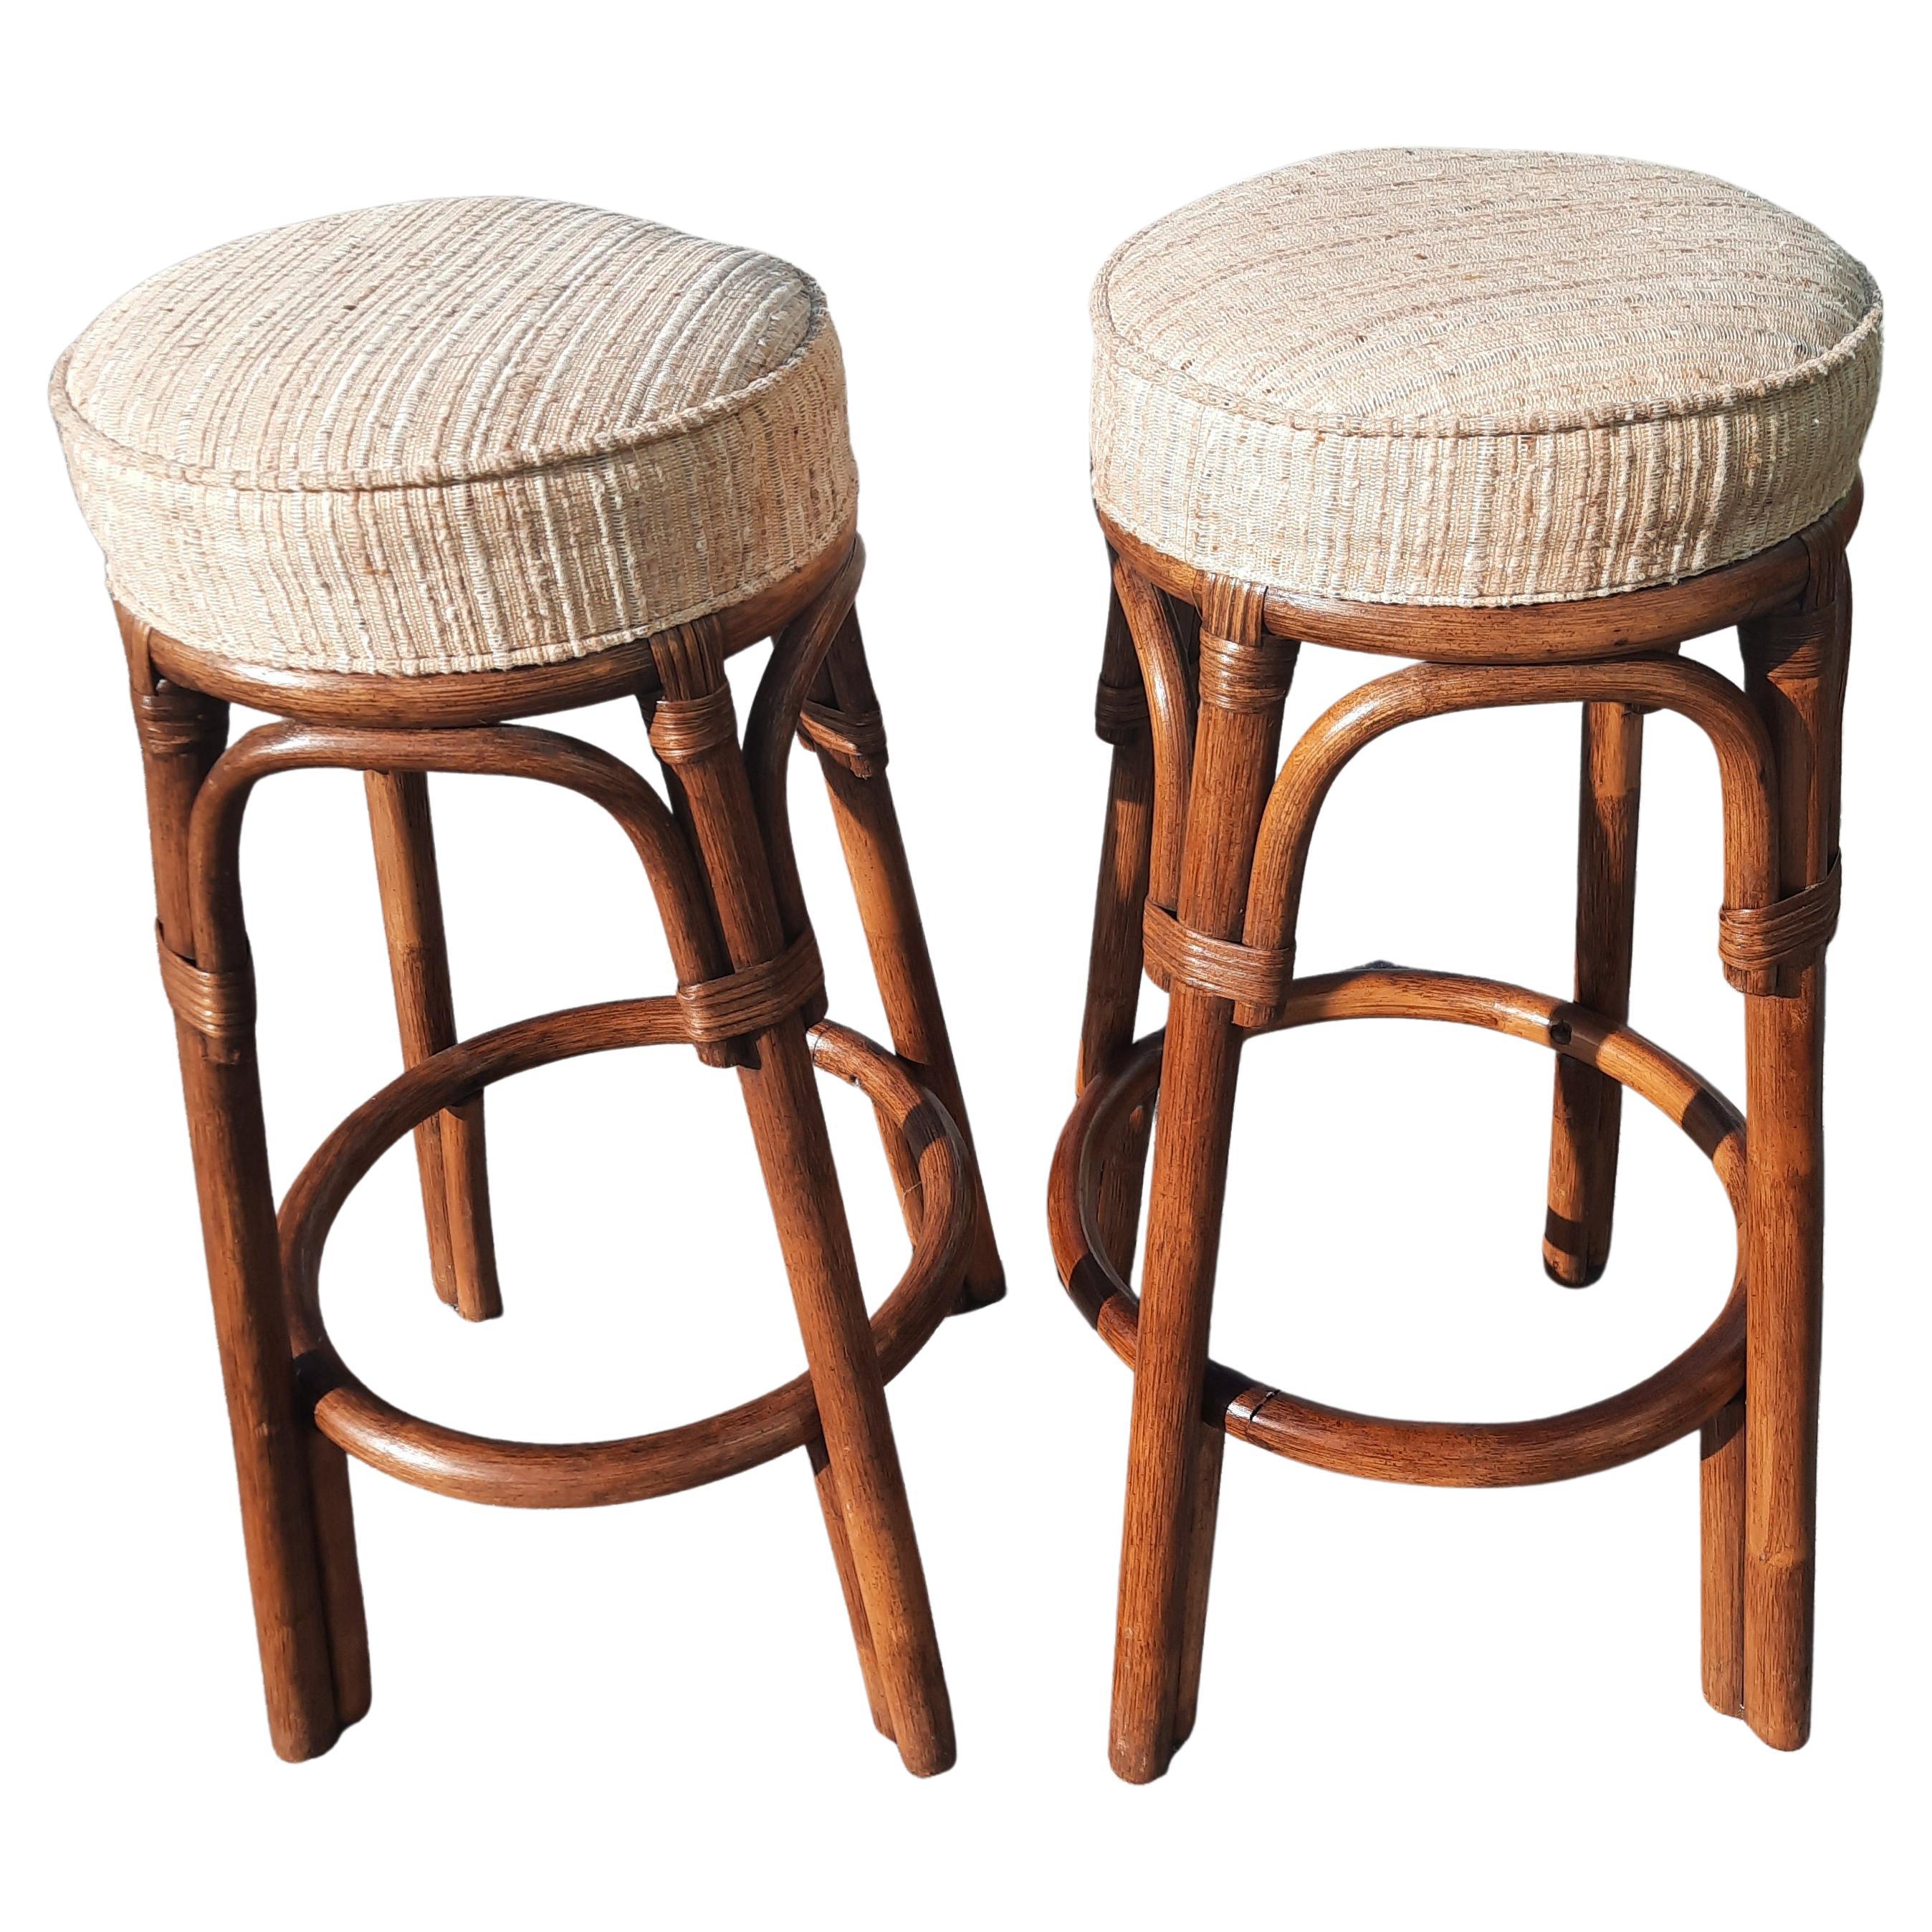 Stacked Rattan and Woven Wicker Bar and Stools Set, circa 1970s 3